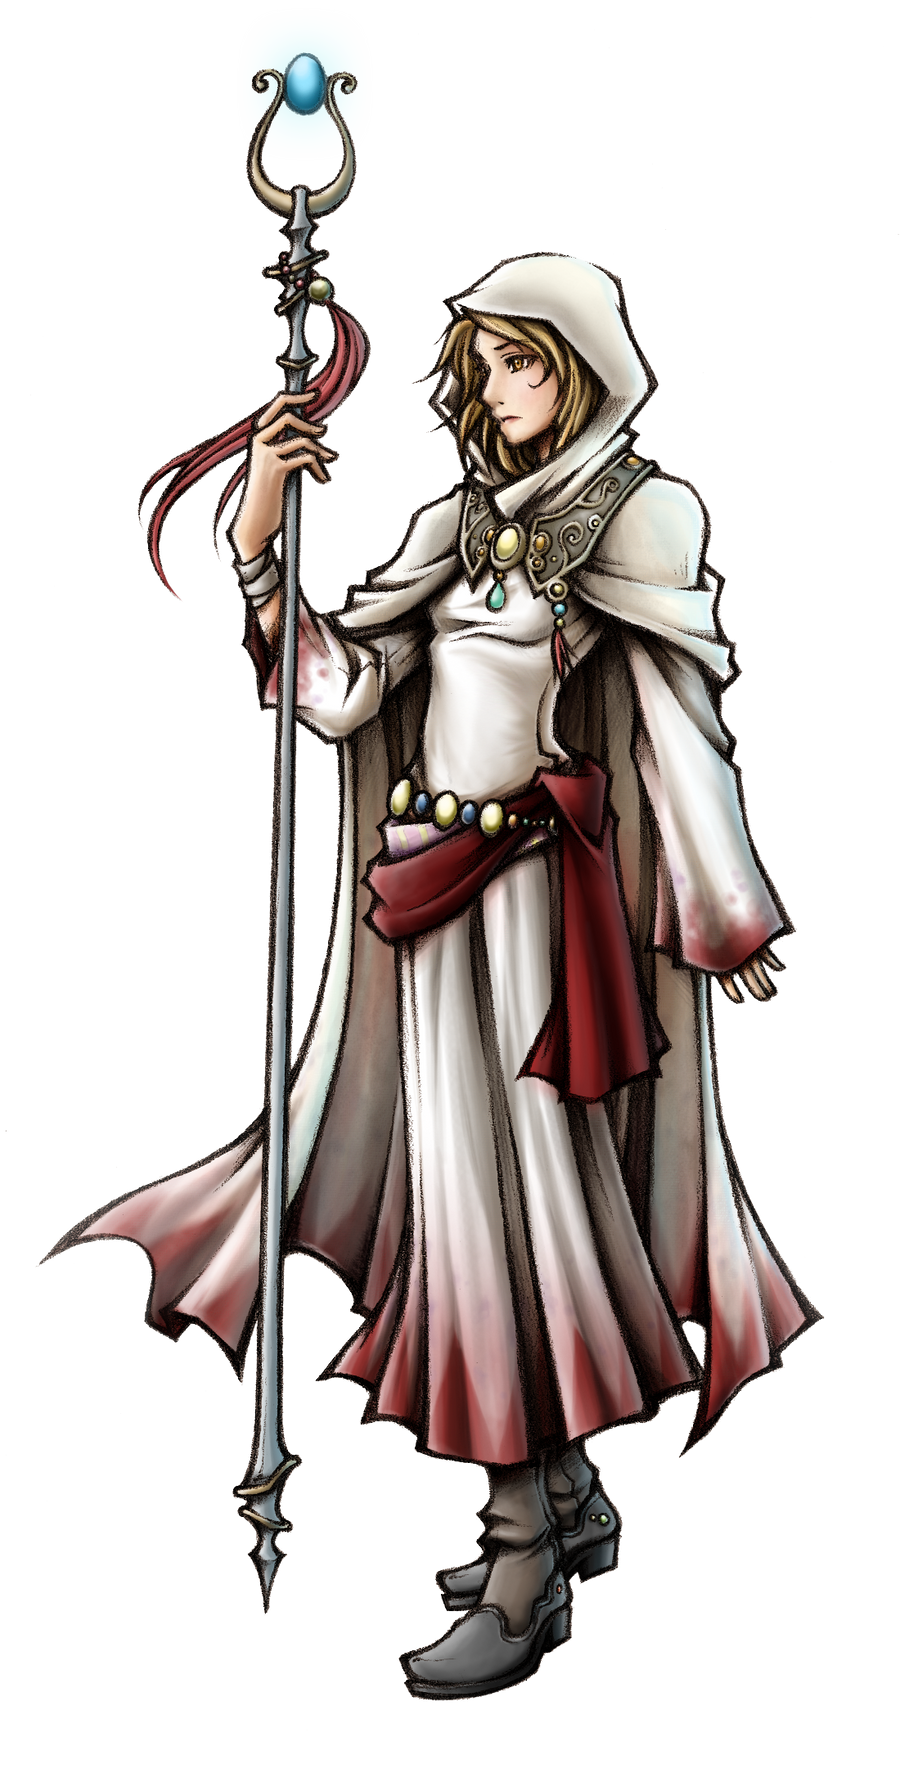 dissidia__white_mage_of_light_by_isaiahjordan-d5huls9.png